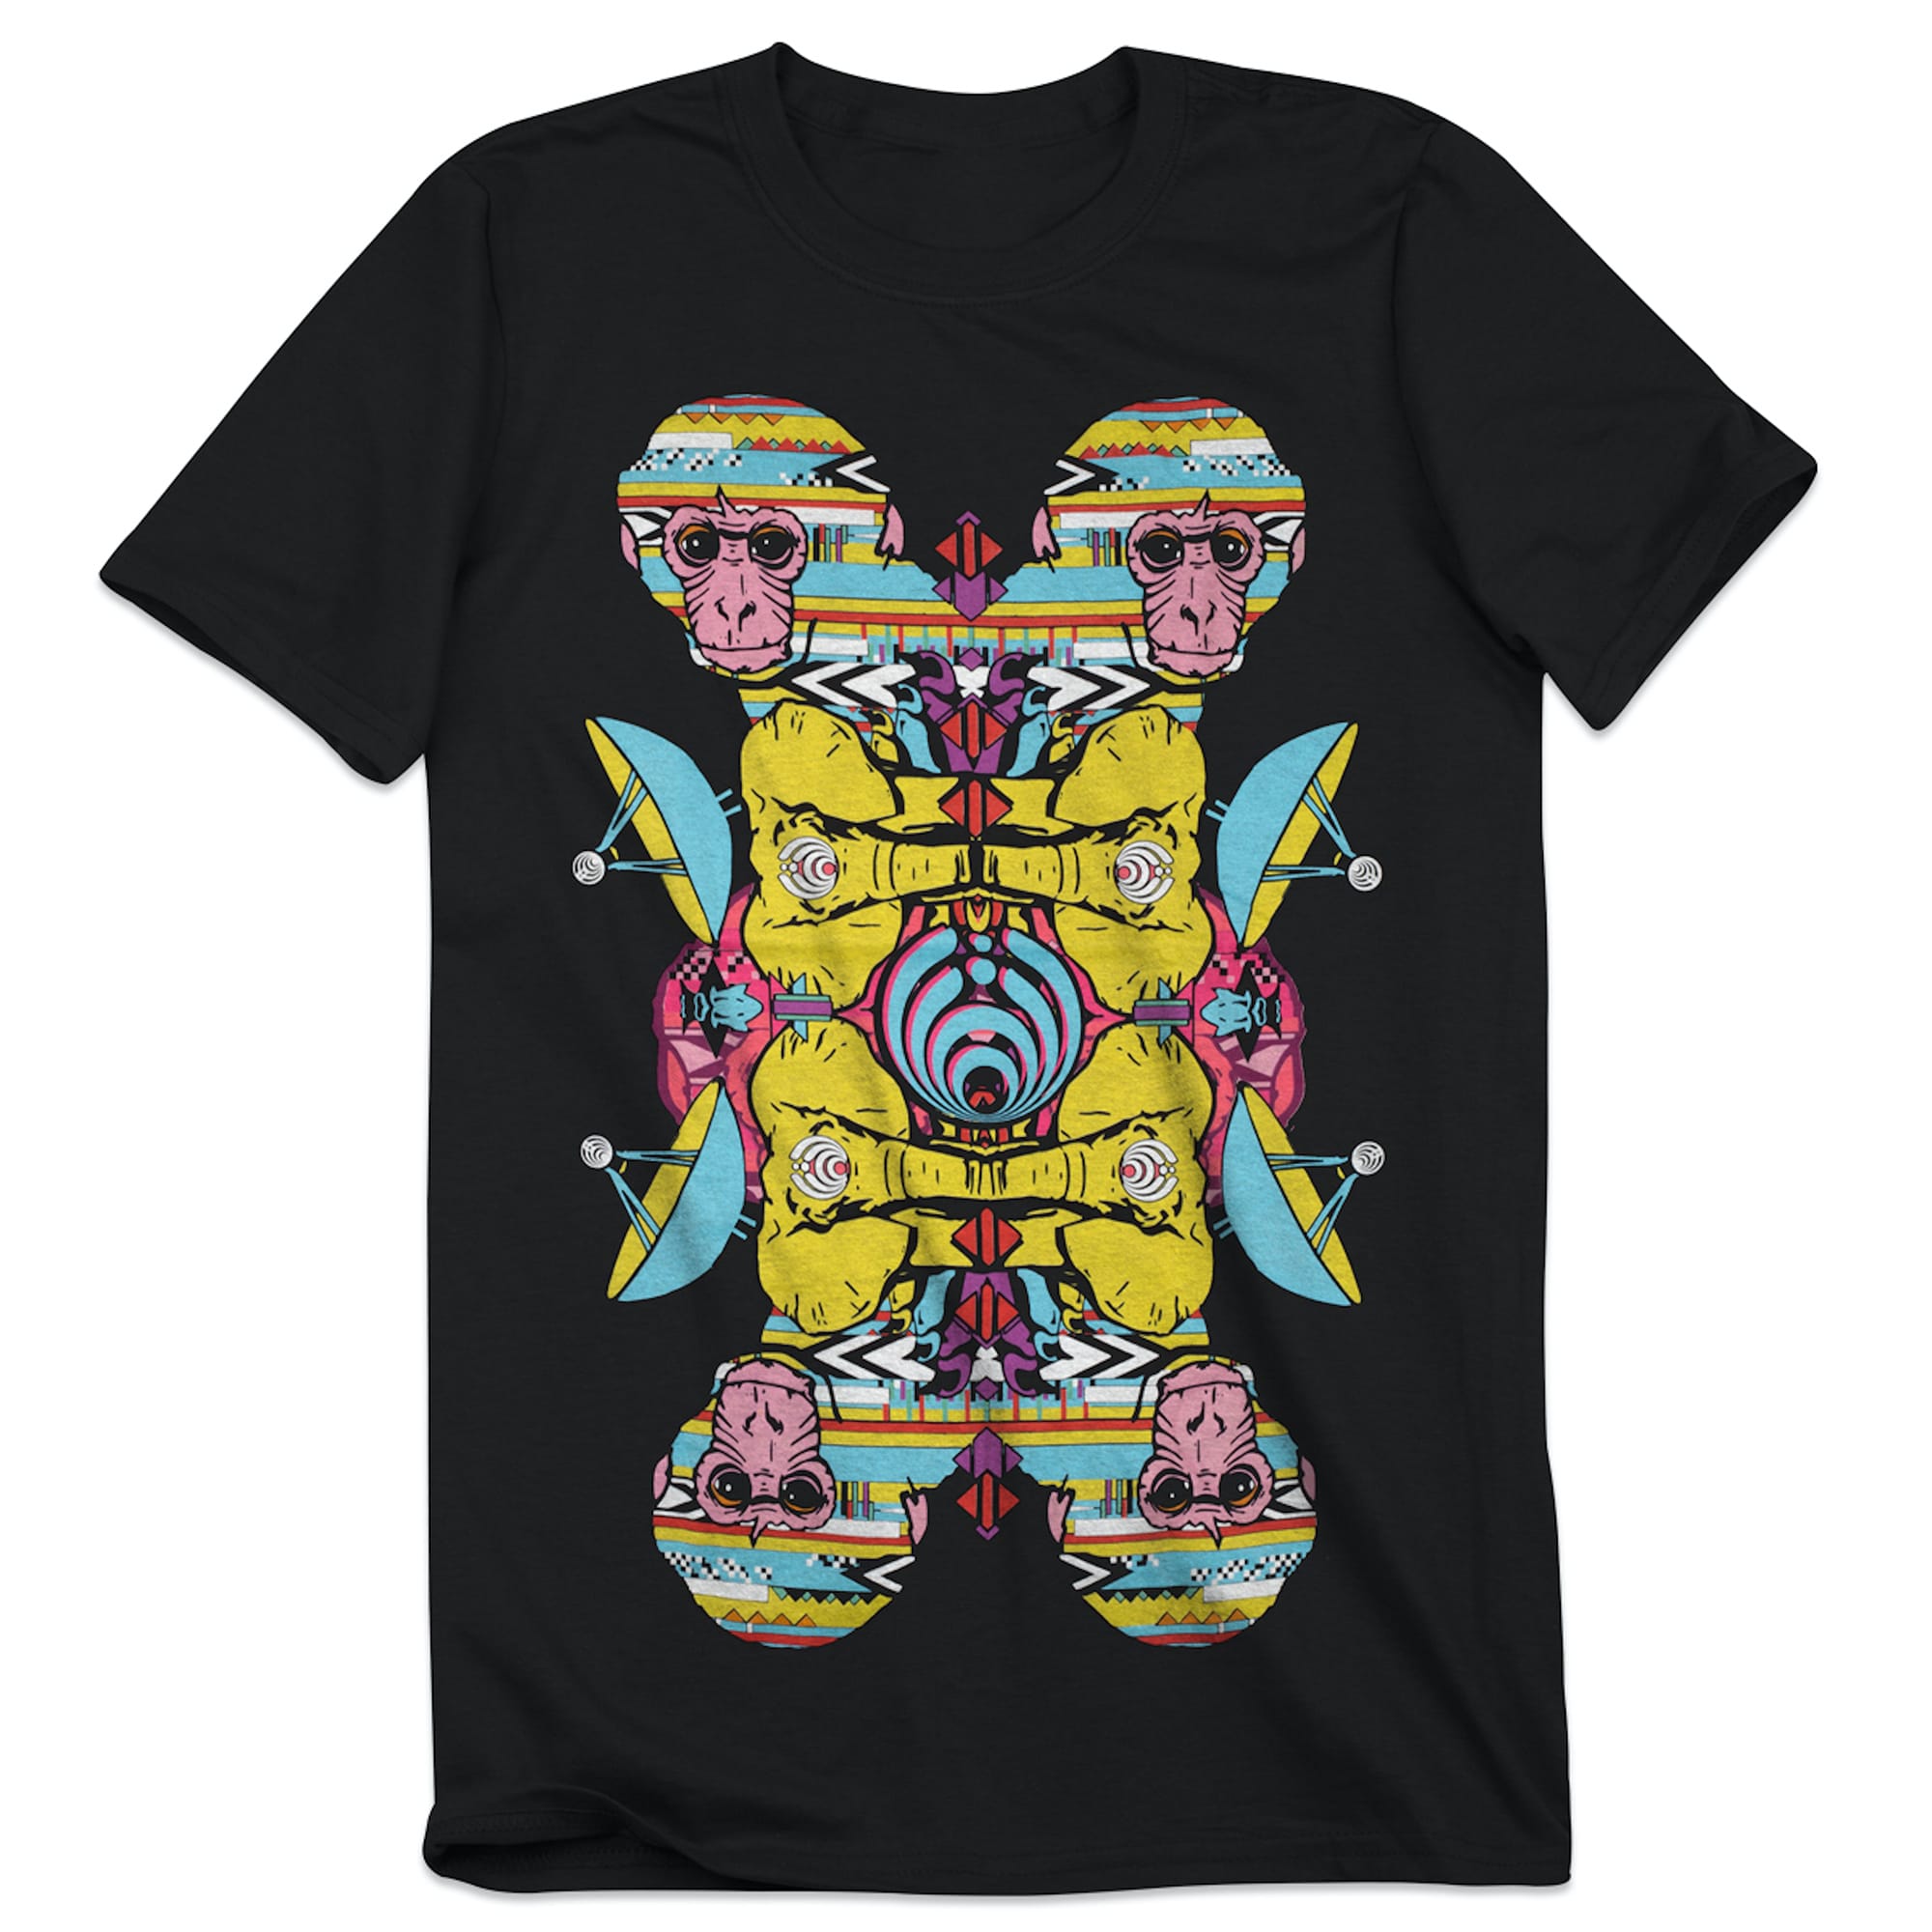 Noise Collection - Black Tee – Bassnectar - The Other Side